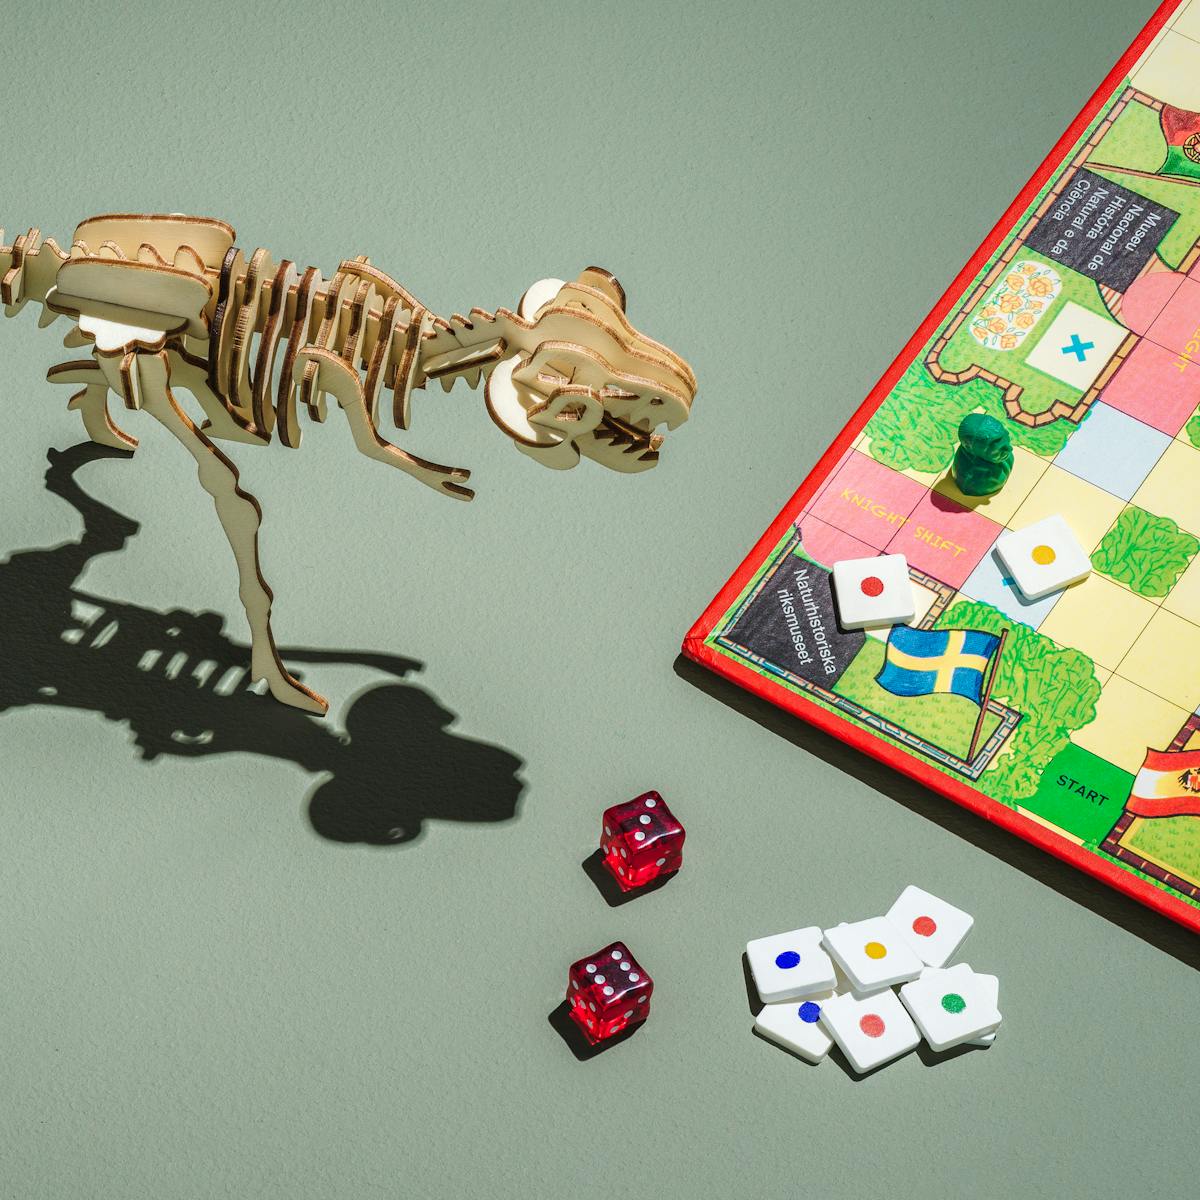 Photograph of a board game placed to the left of the frame,  featuring museums from various countries, red, green, blue and yellow counters, and two red dice.  In the centre of the frame is a laser cut wooden tyrannosaurus rex model.